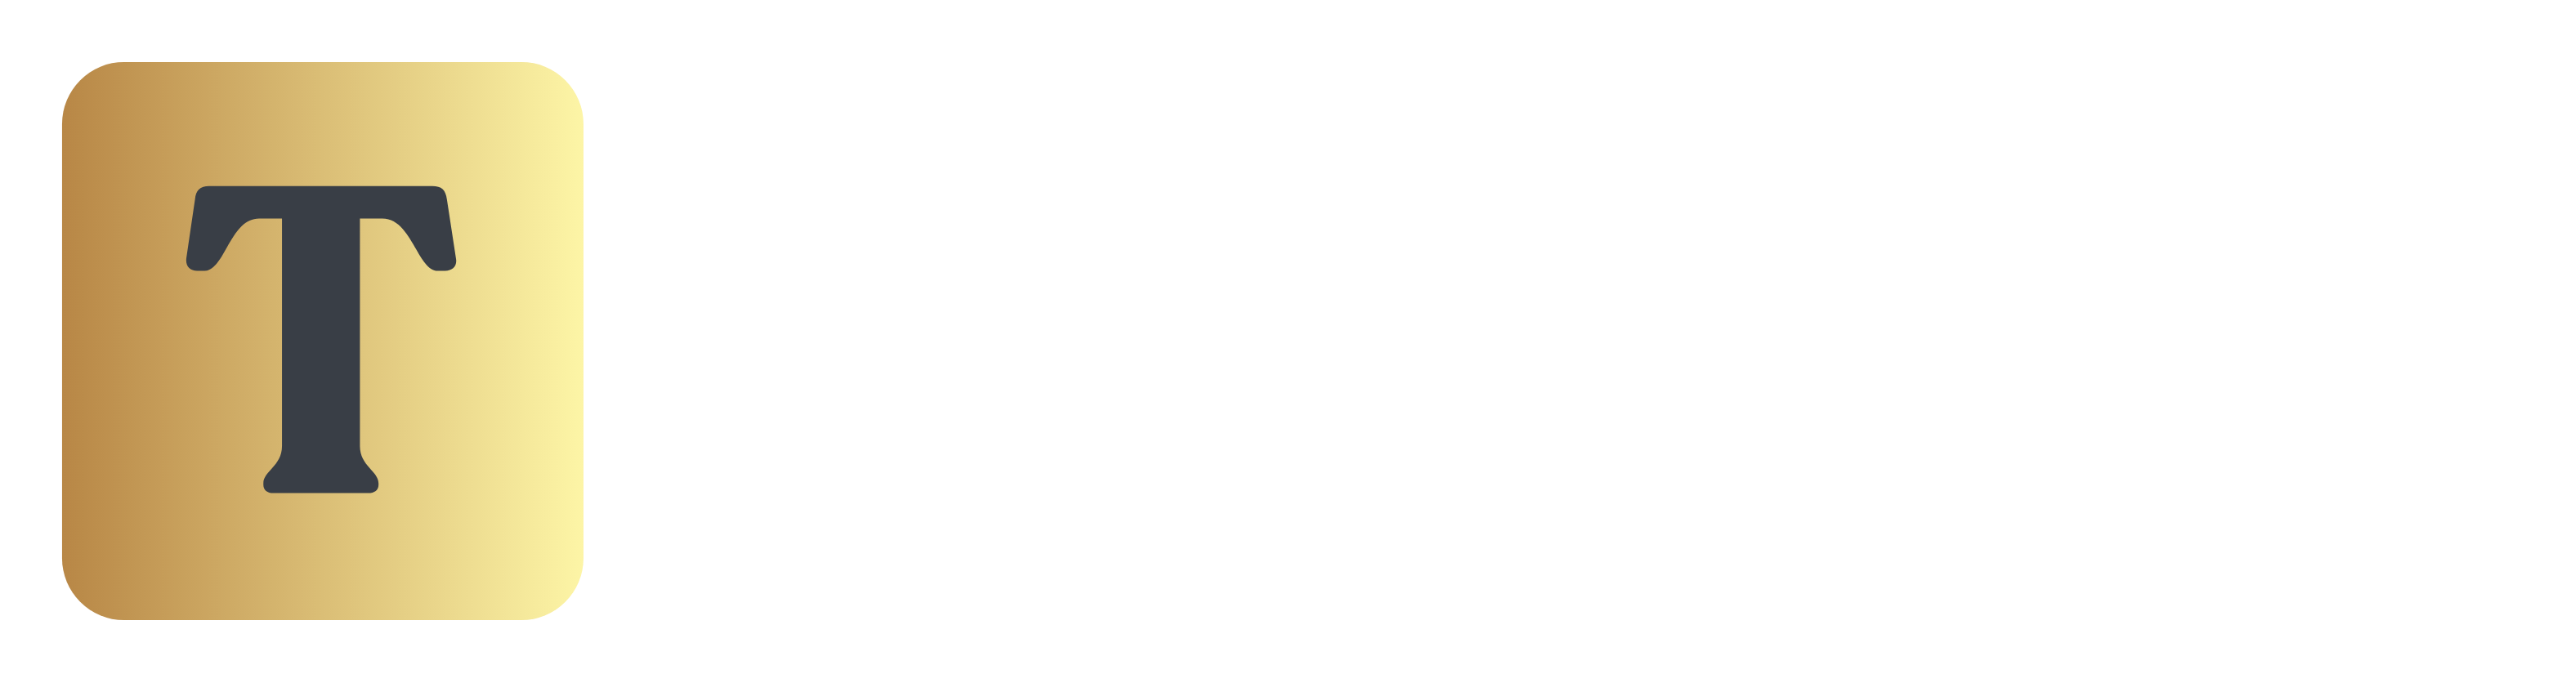 About Us, thetechfossil, the tech fossil